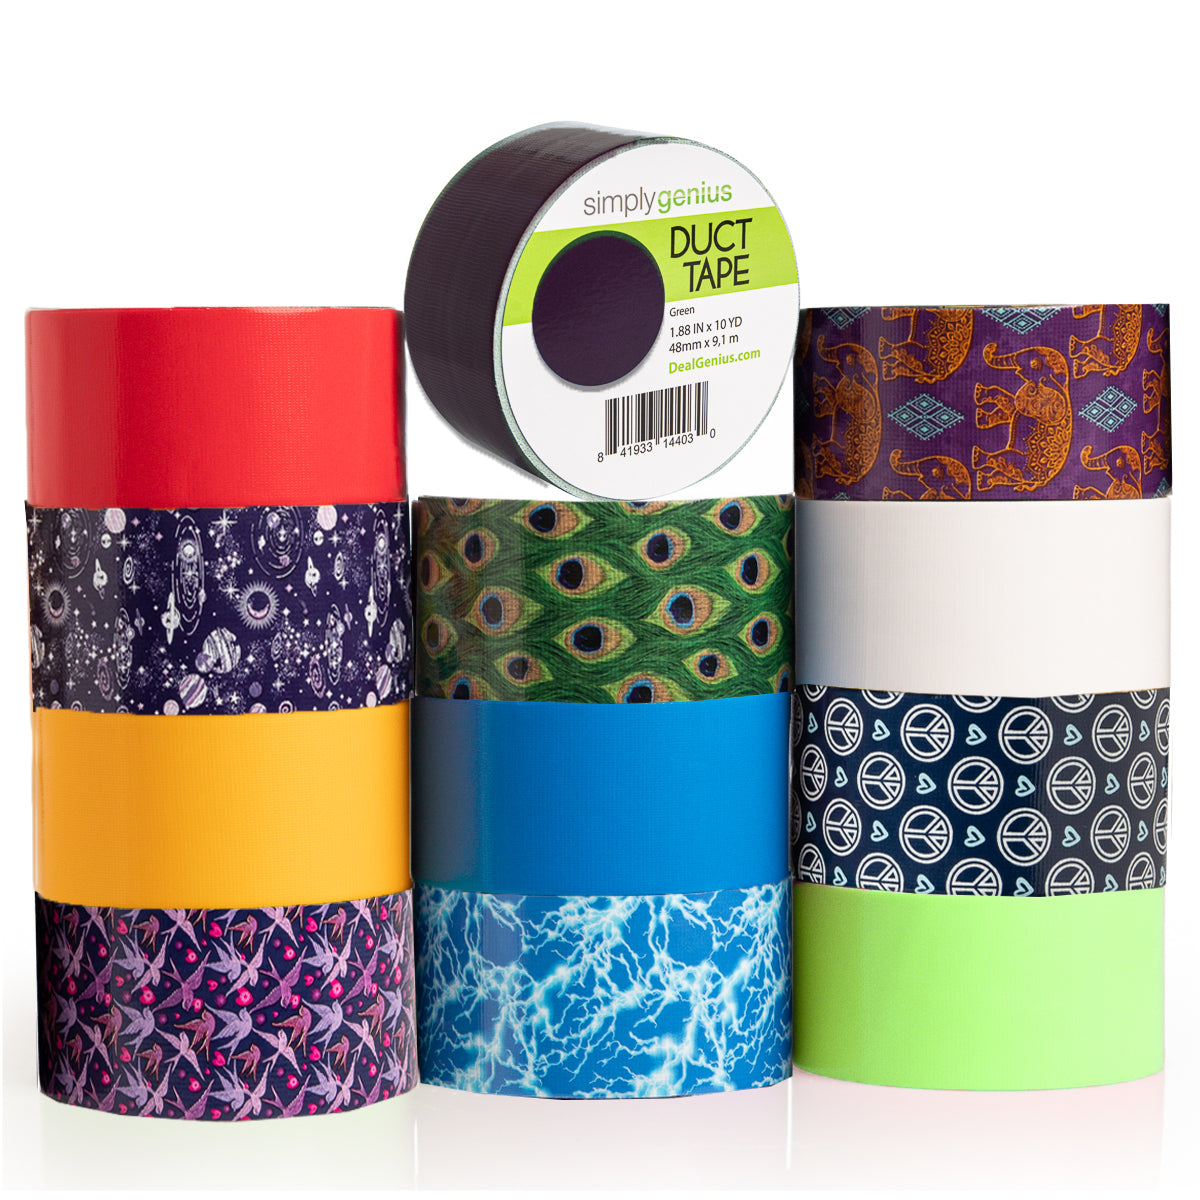 Simply Genius Pattern Duct Tape Heavy Duty - Craft Supplies for Kids &  Adults - Colored Duct Tape - Single Roll 1.8 in x 10 Yards - Colorful Tape  for DIY, Craft & Home Improvement (Blue Waves)